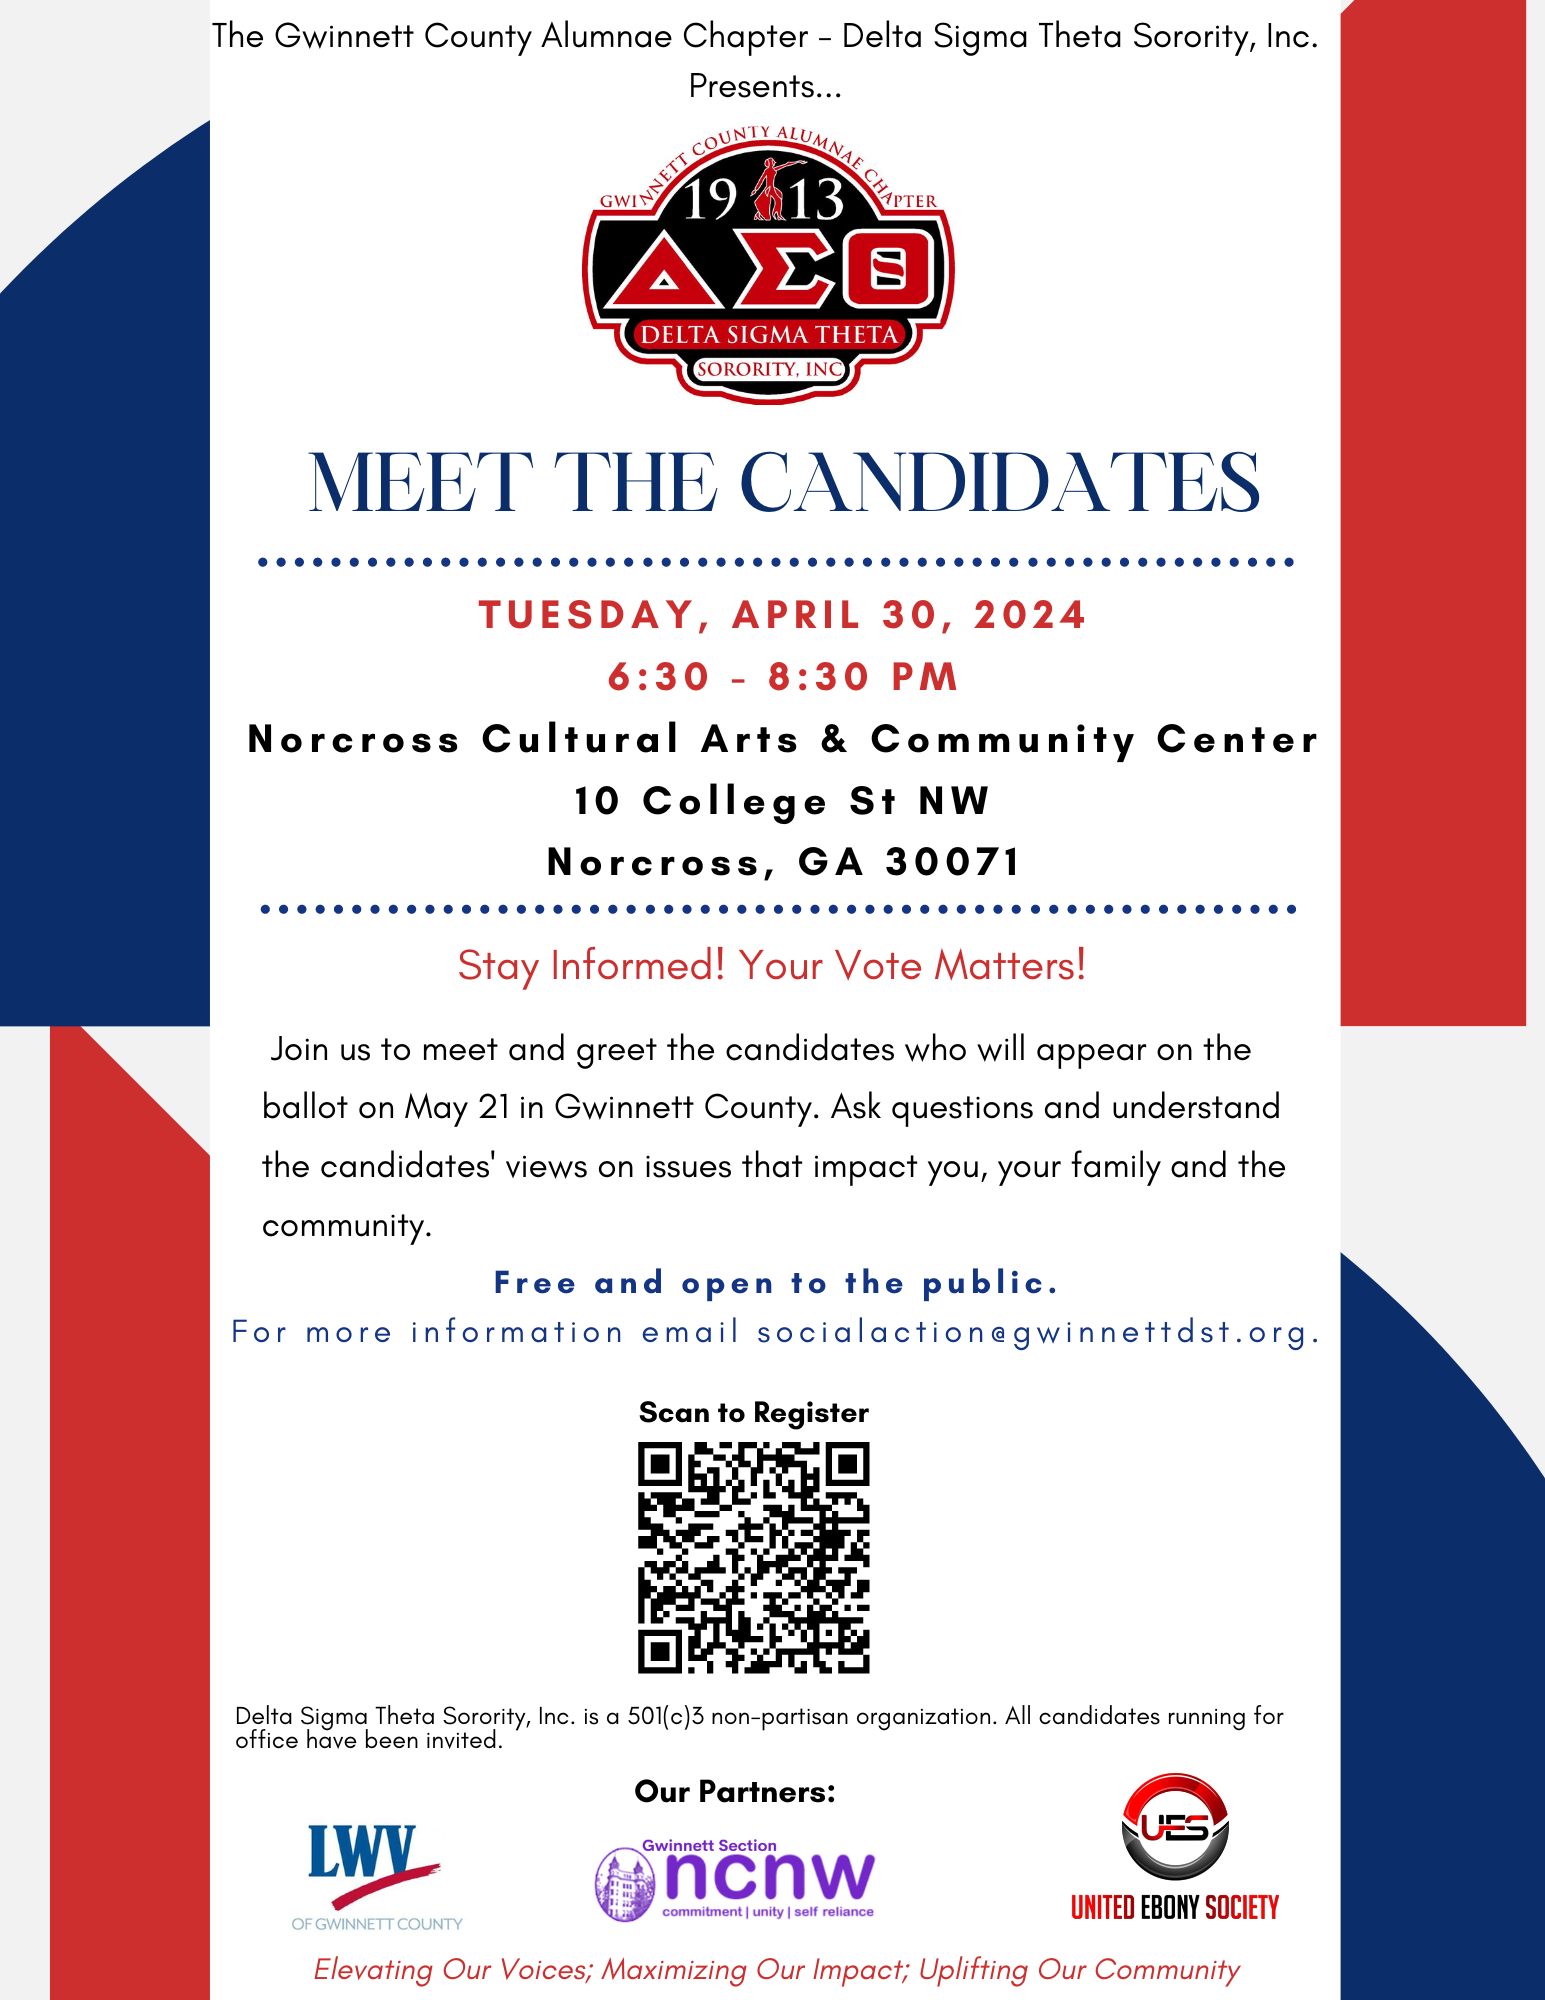 Meet the Candidates @ Norcross Cultural Arts & Community Center